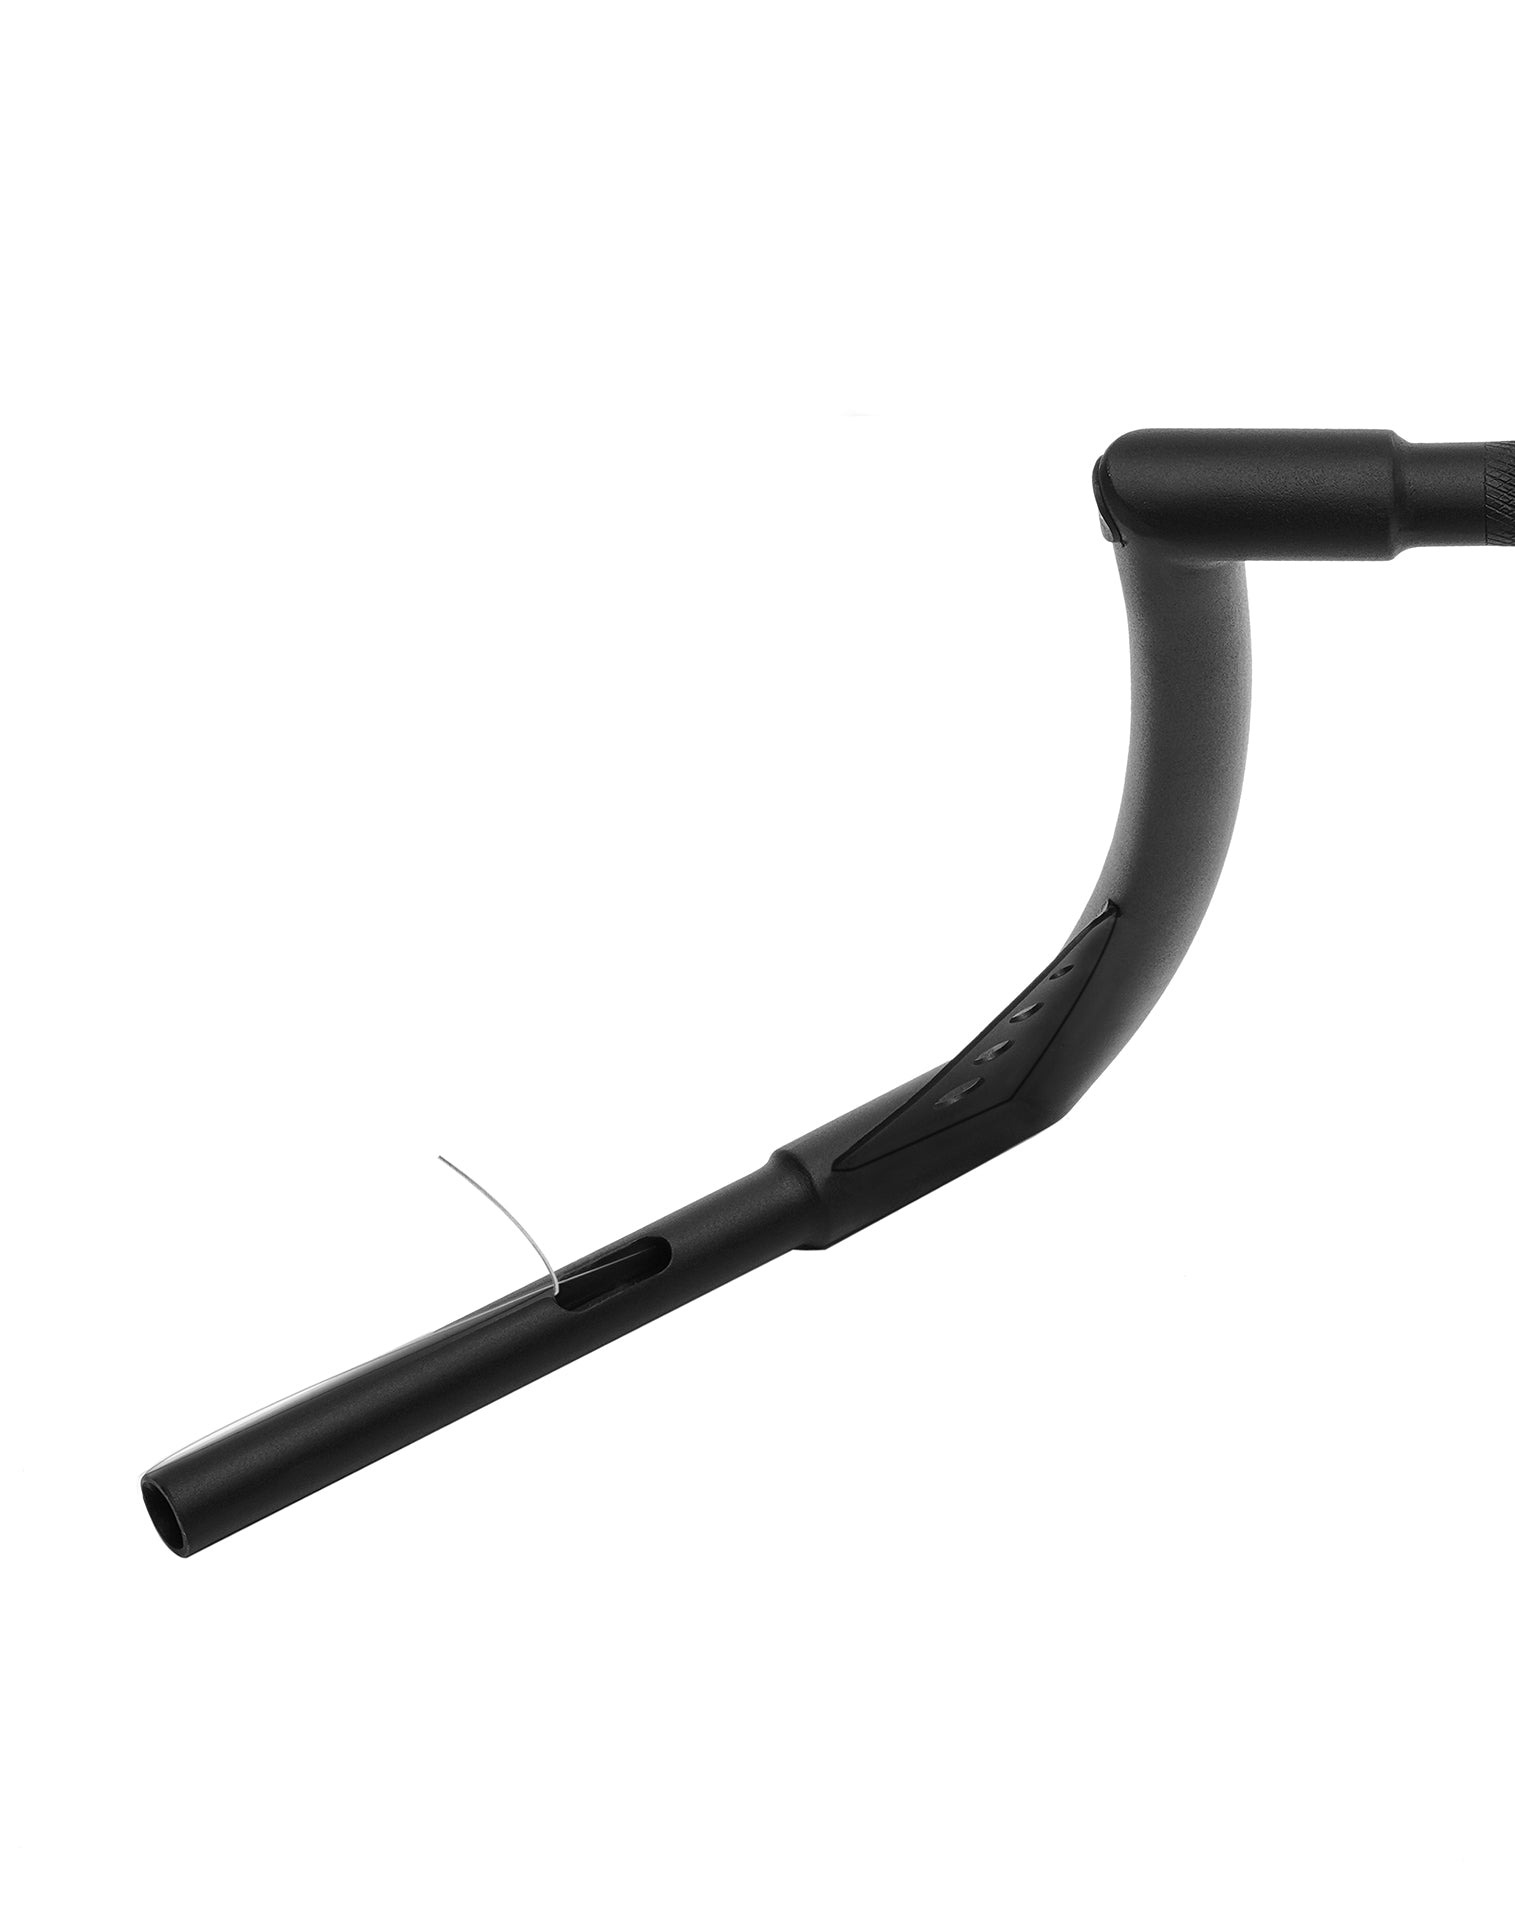 Viking Iron Born 12" Handlebar for Harley Dyna Low Rider FXDL Matte Black Close up View